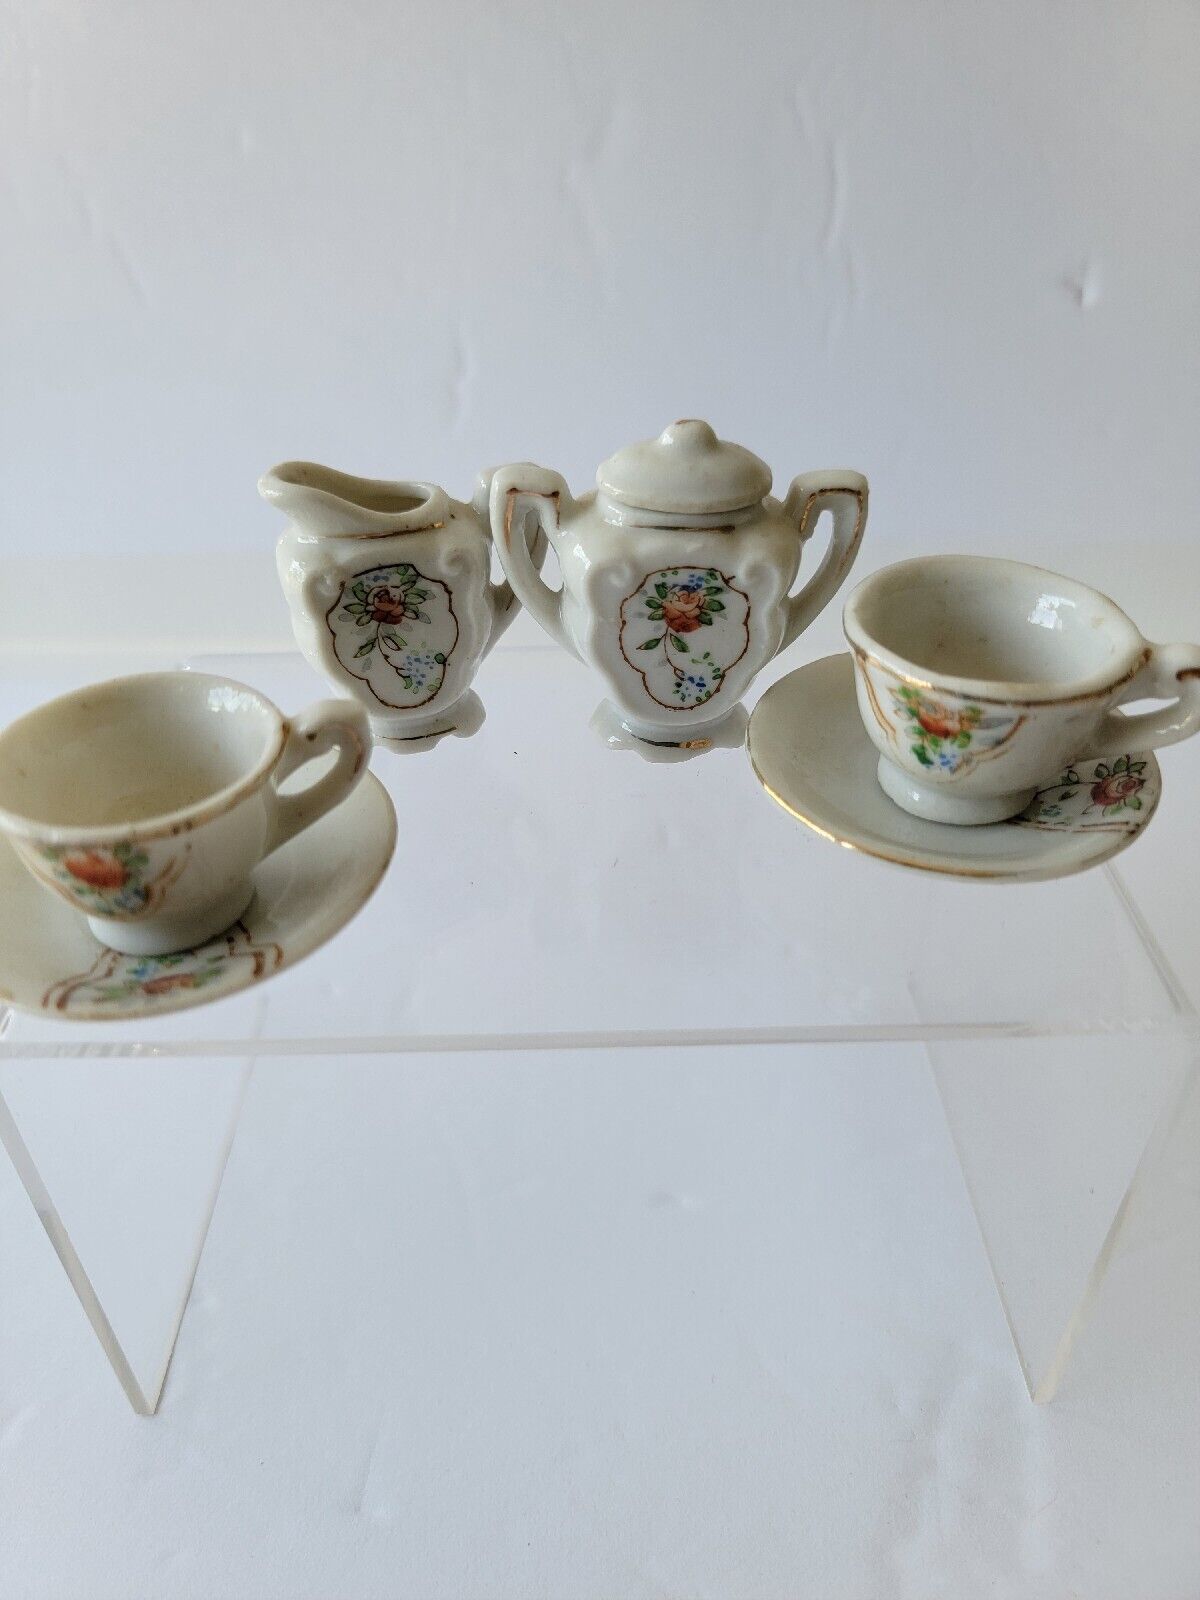 Minature Floral Tea Set  Made in Occupied Japan